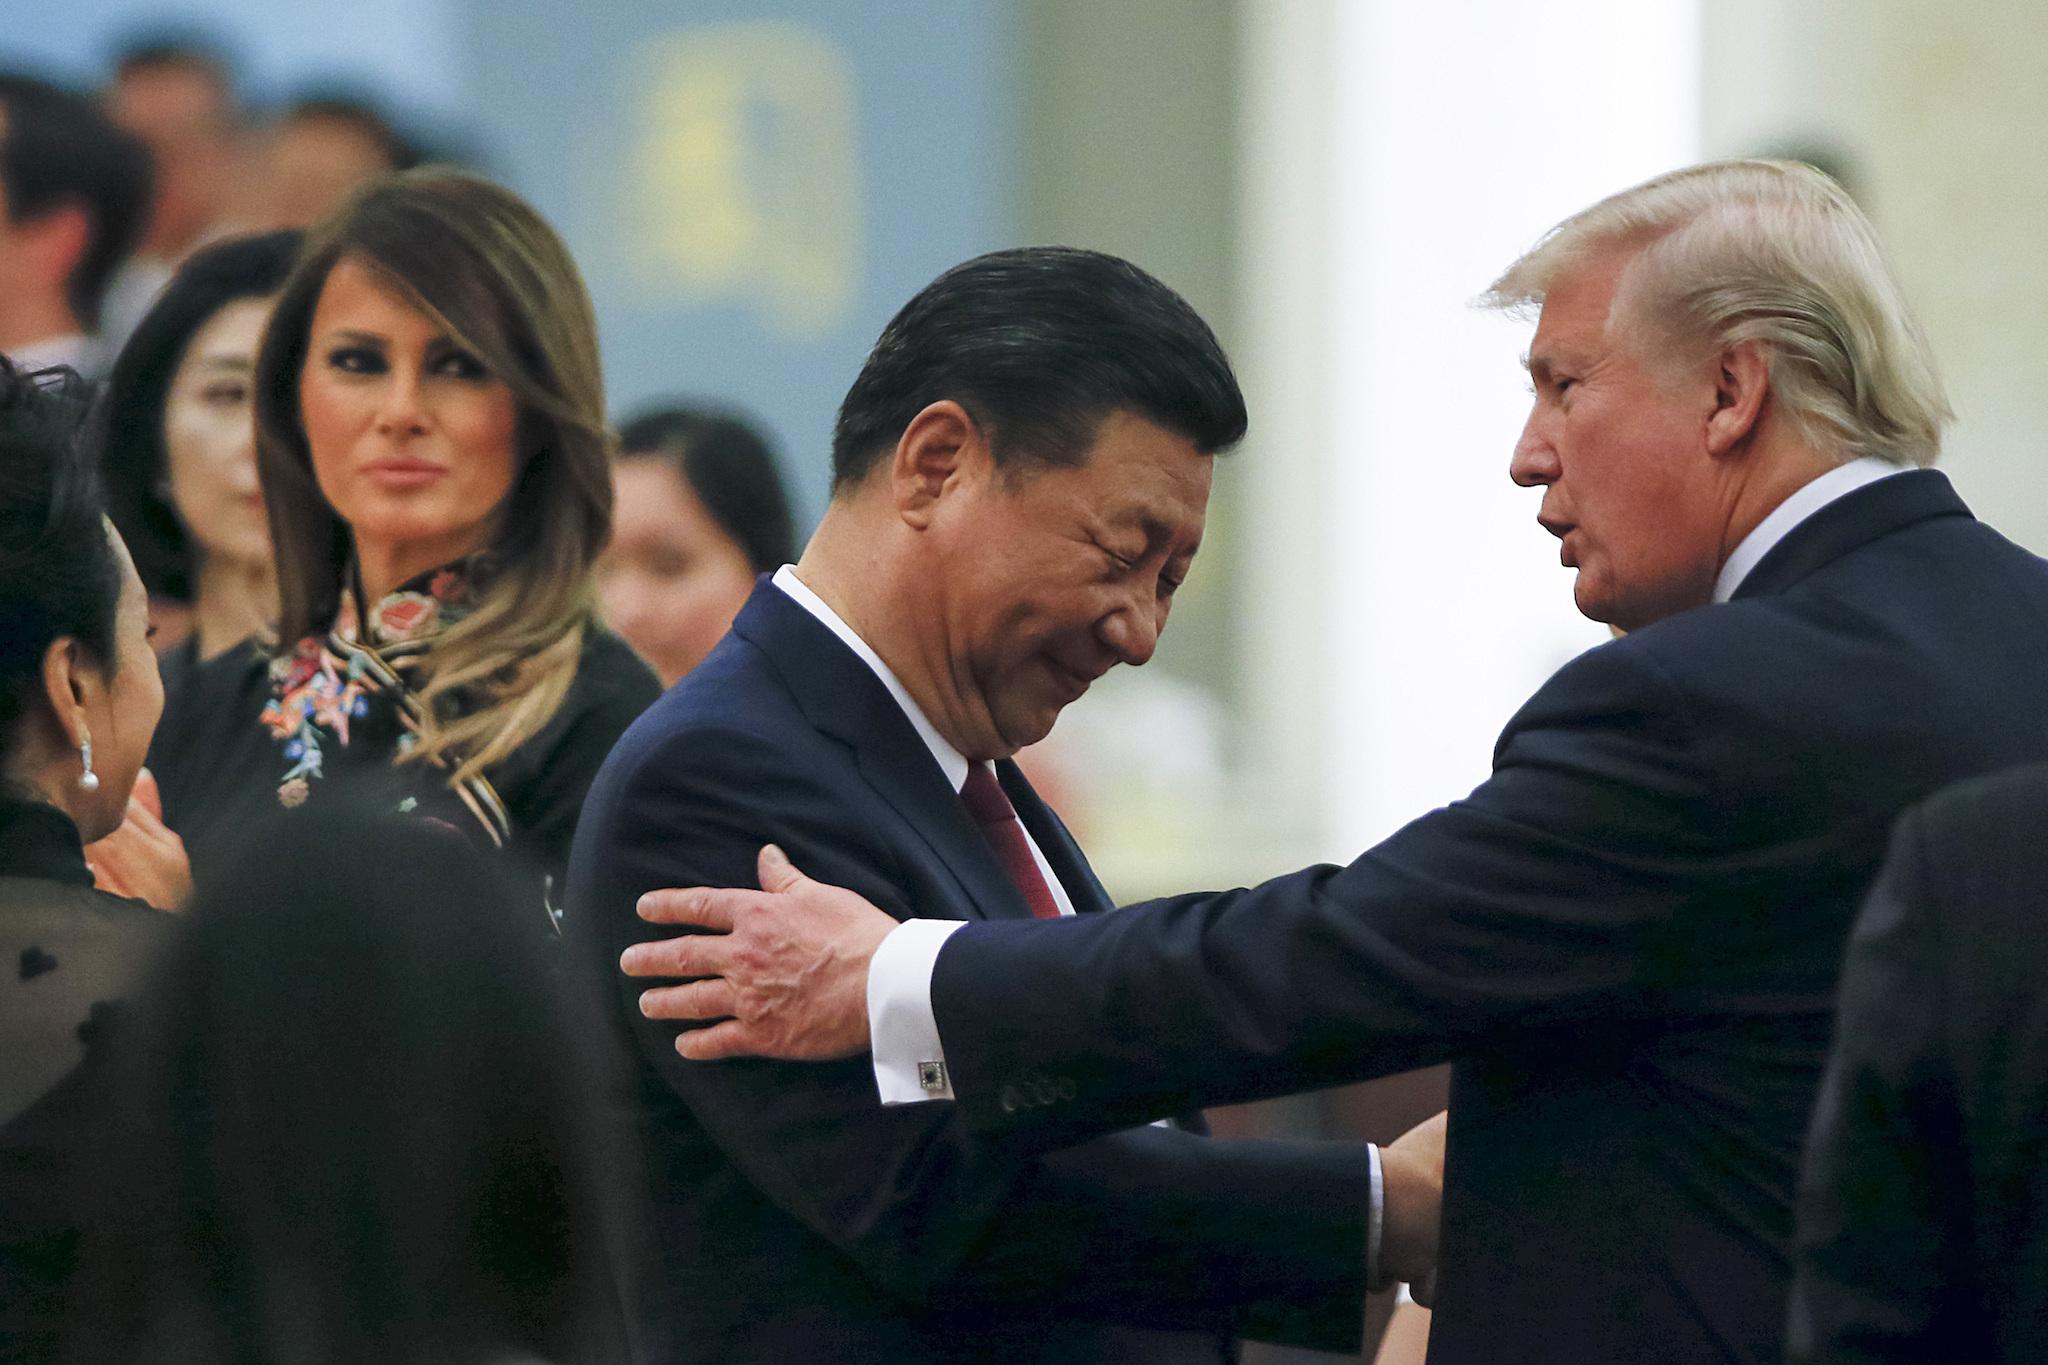 China's President Xi Jinping and US President Donald Trump attend a state dinner in Beijing (Thomas Peter/Pool Photo via AP)